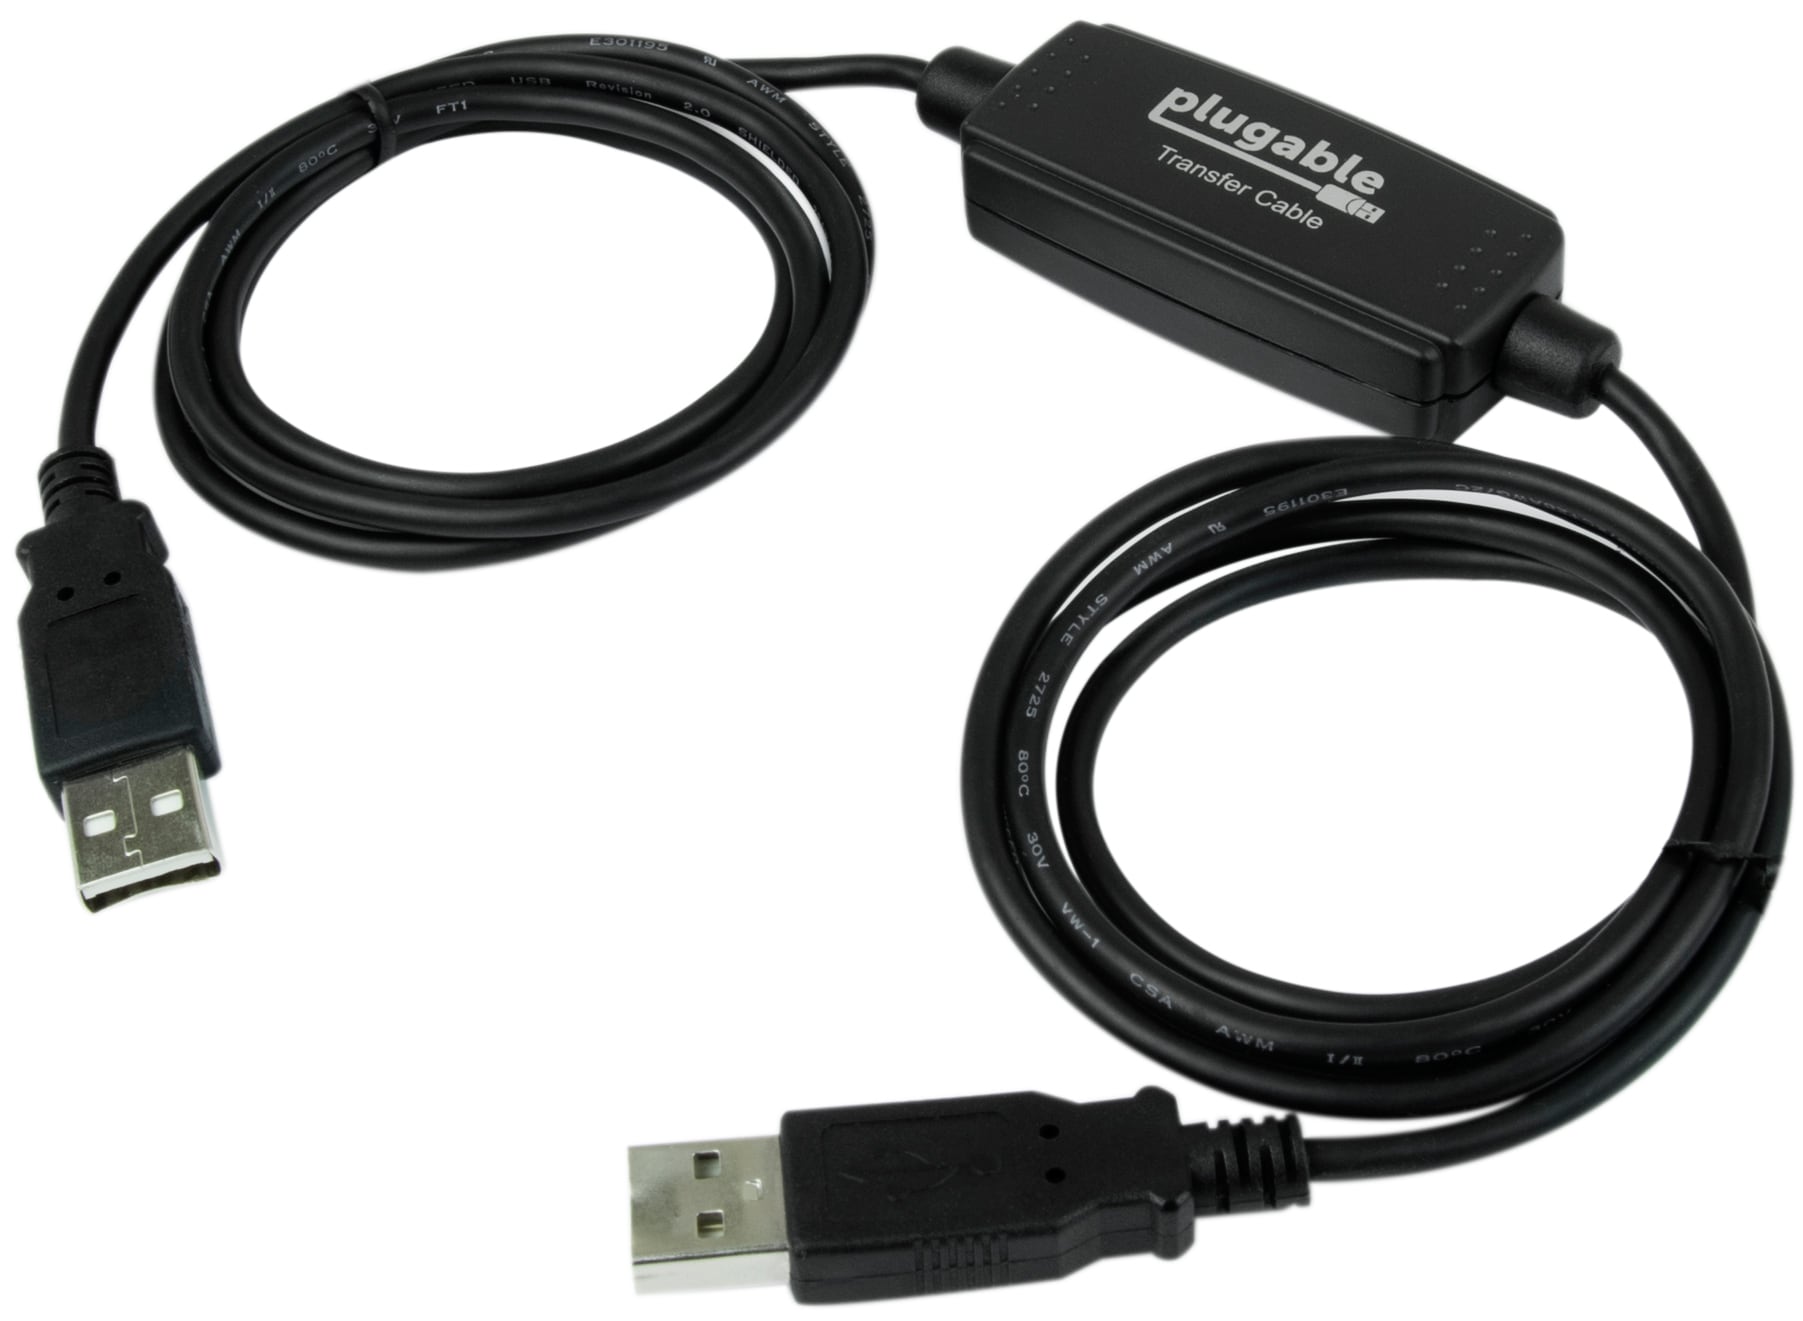 Plugable USB Transfer Cable, Unlimited Use, Transfer Data Between 2 Windows PC's